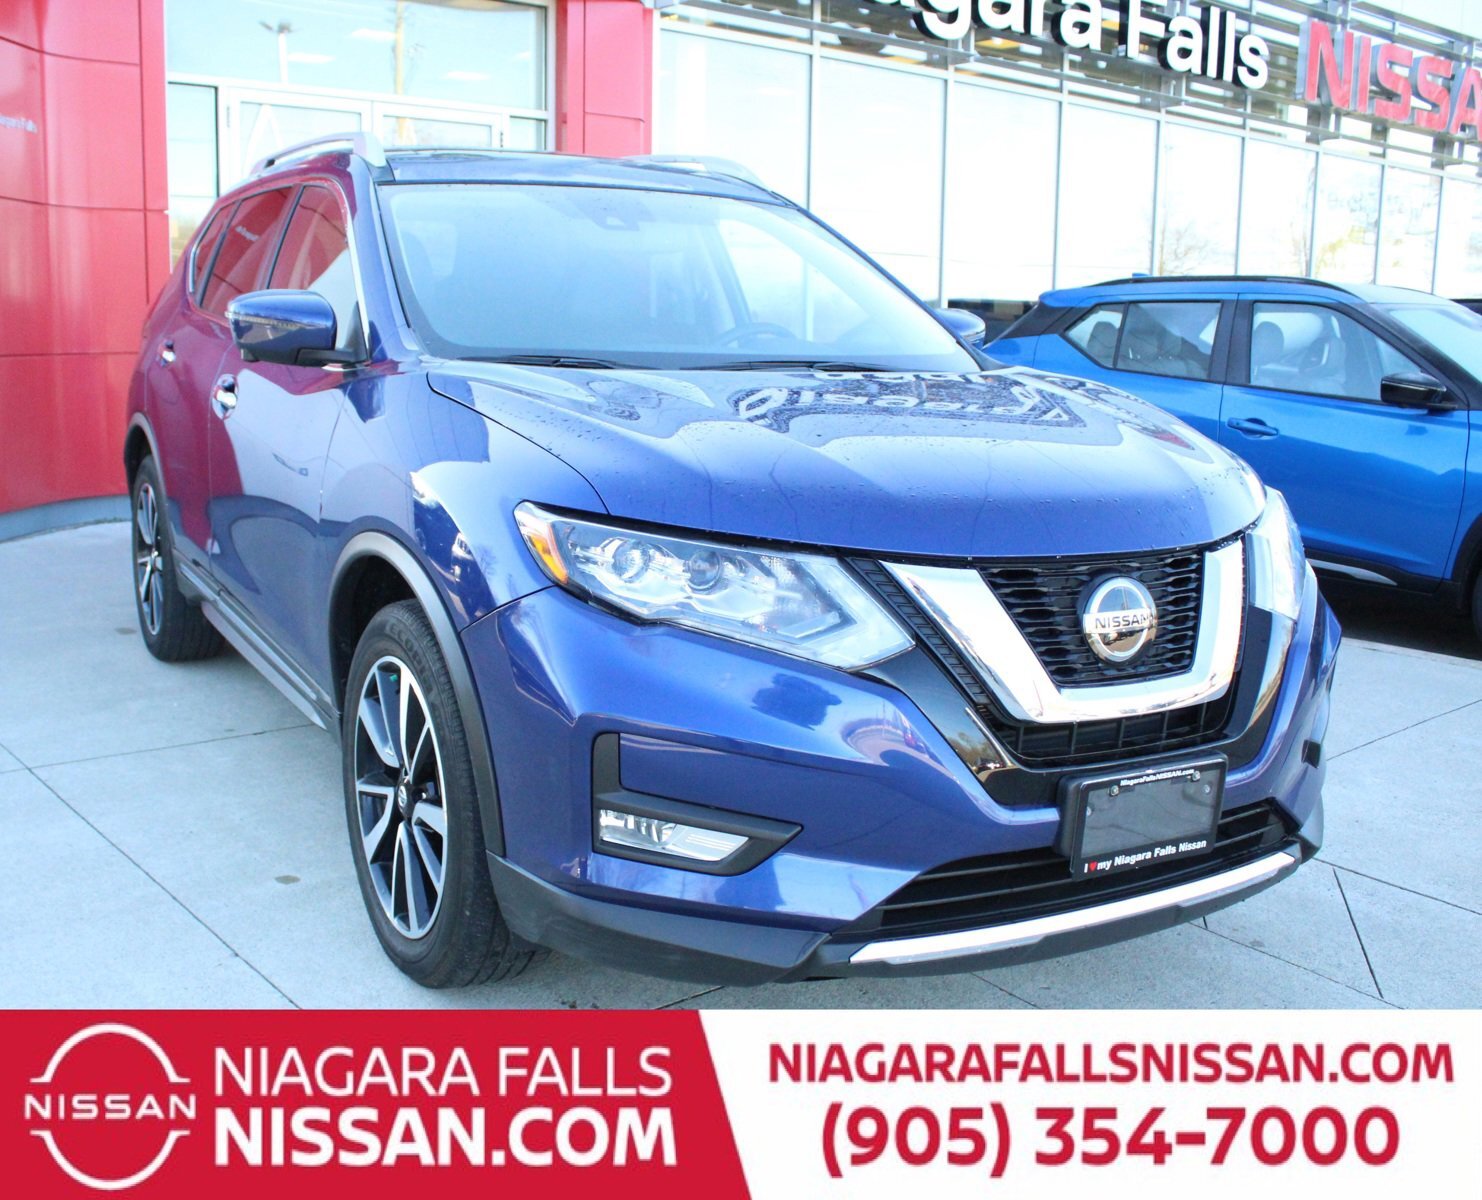 2019 Nissan Rogue SL/ LOW KM/ POWER LIFTGATE/ HEATED FRONT SEATS